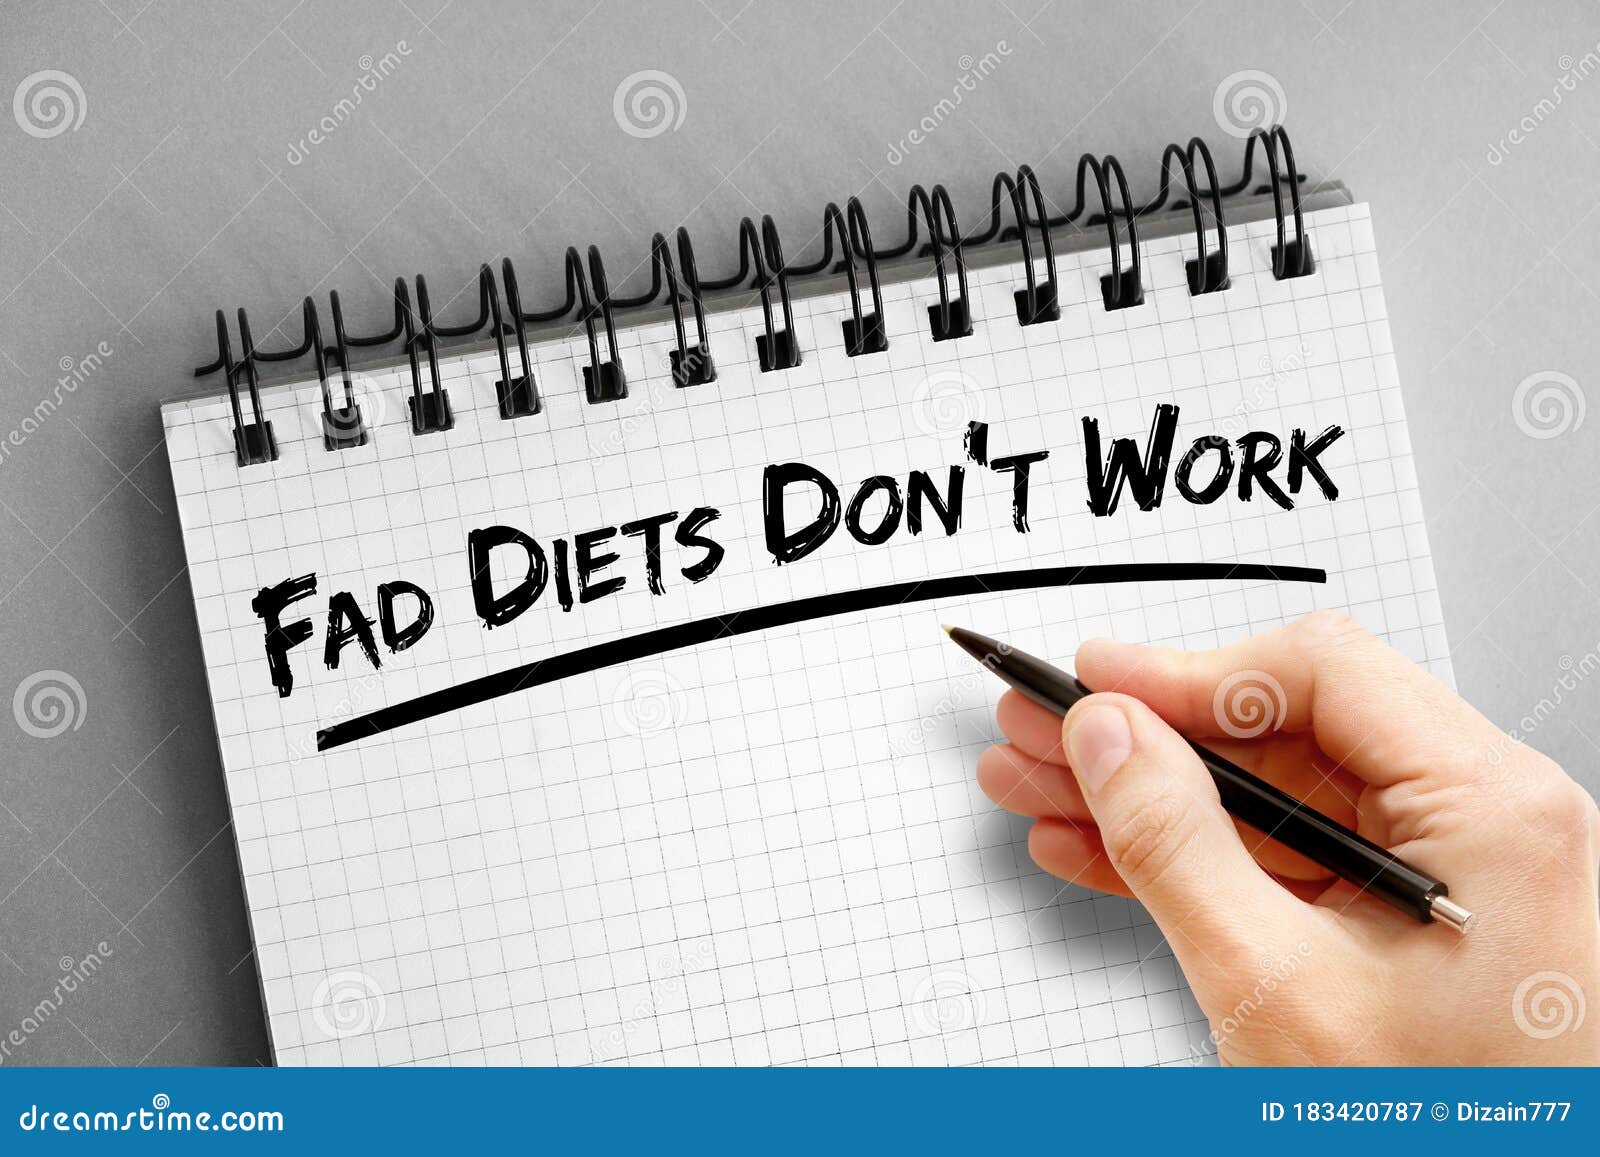 text note - fad diets don`t work, health concept on notepad